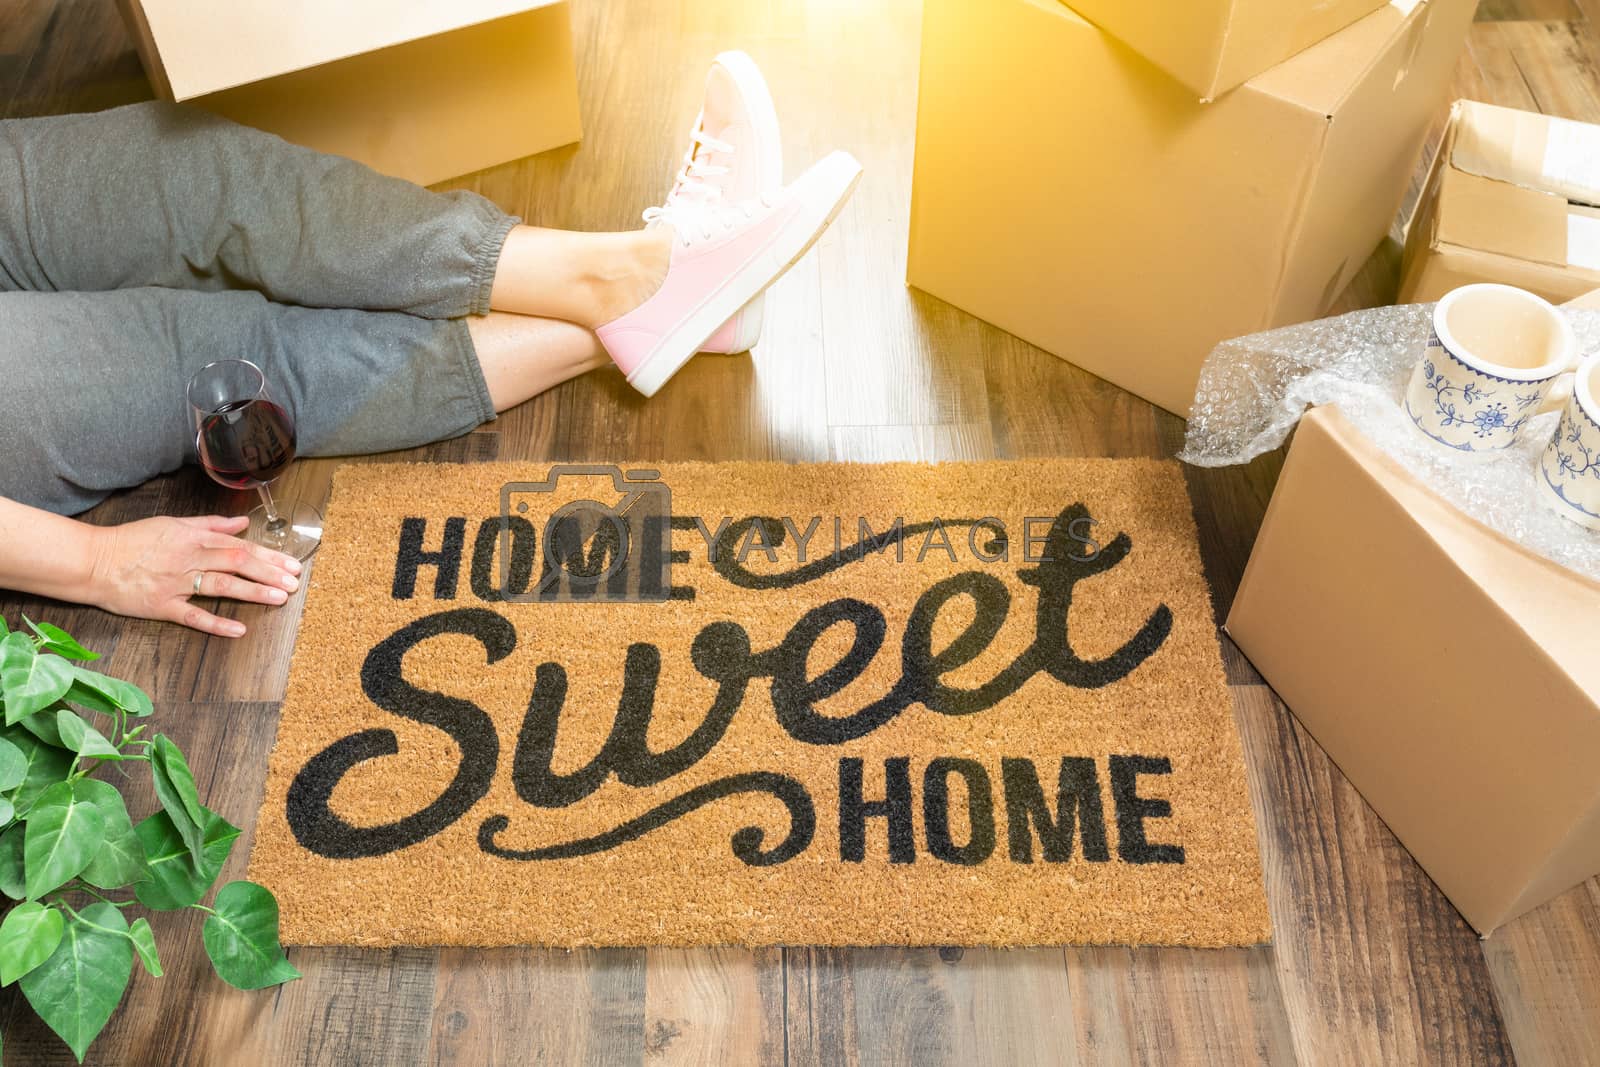 Royalty free image of Woman Wearing Sweats Relaxing Near Home Sweet Home Welcome Mat,  by Feverpitched